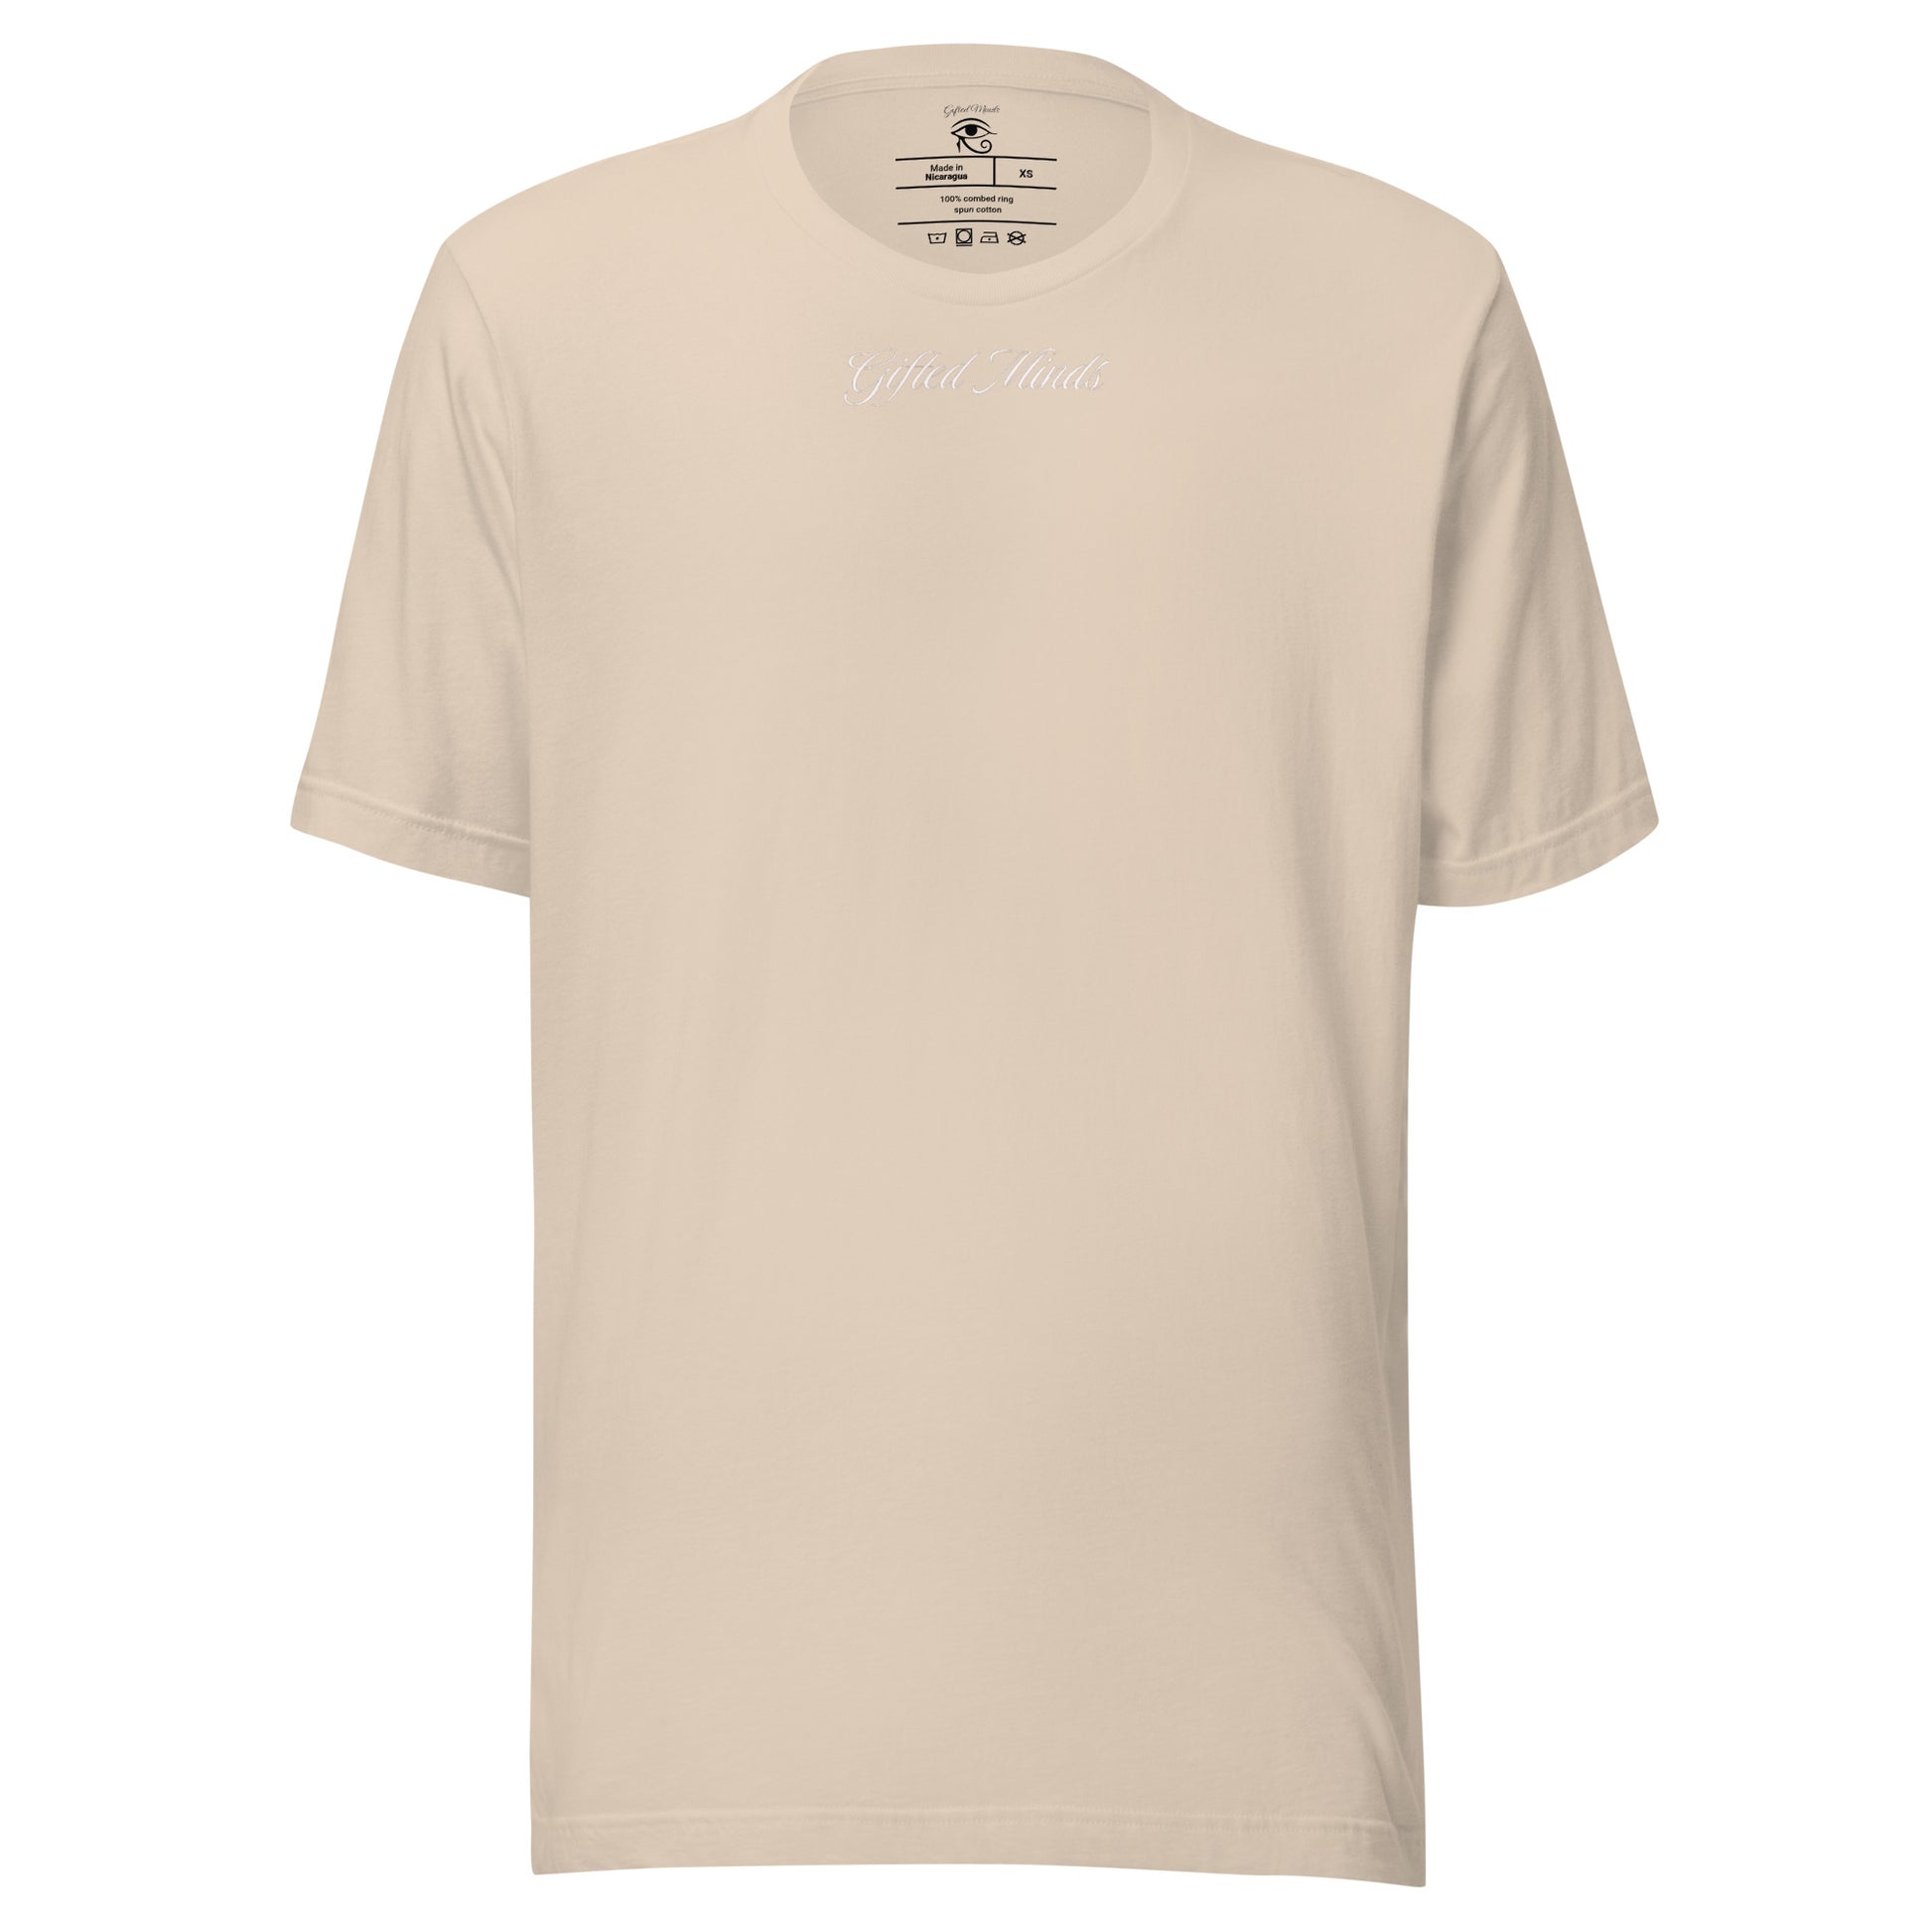 Soul Keepers Unisex T-shirt - GFTD MNDS